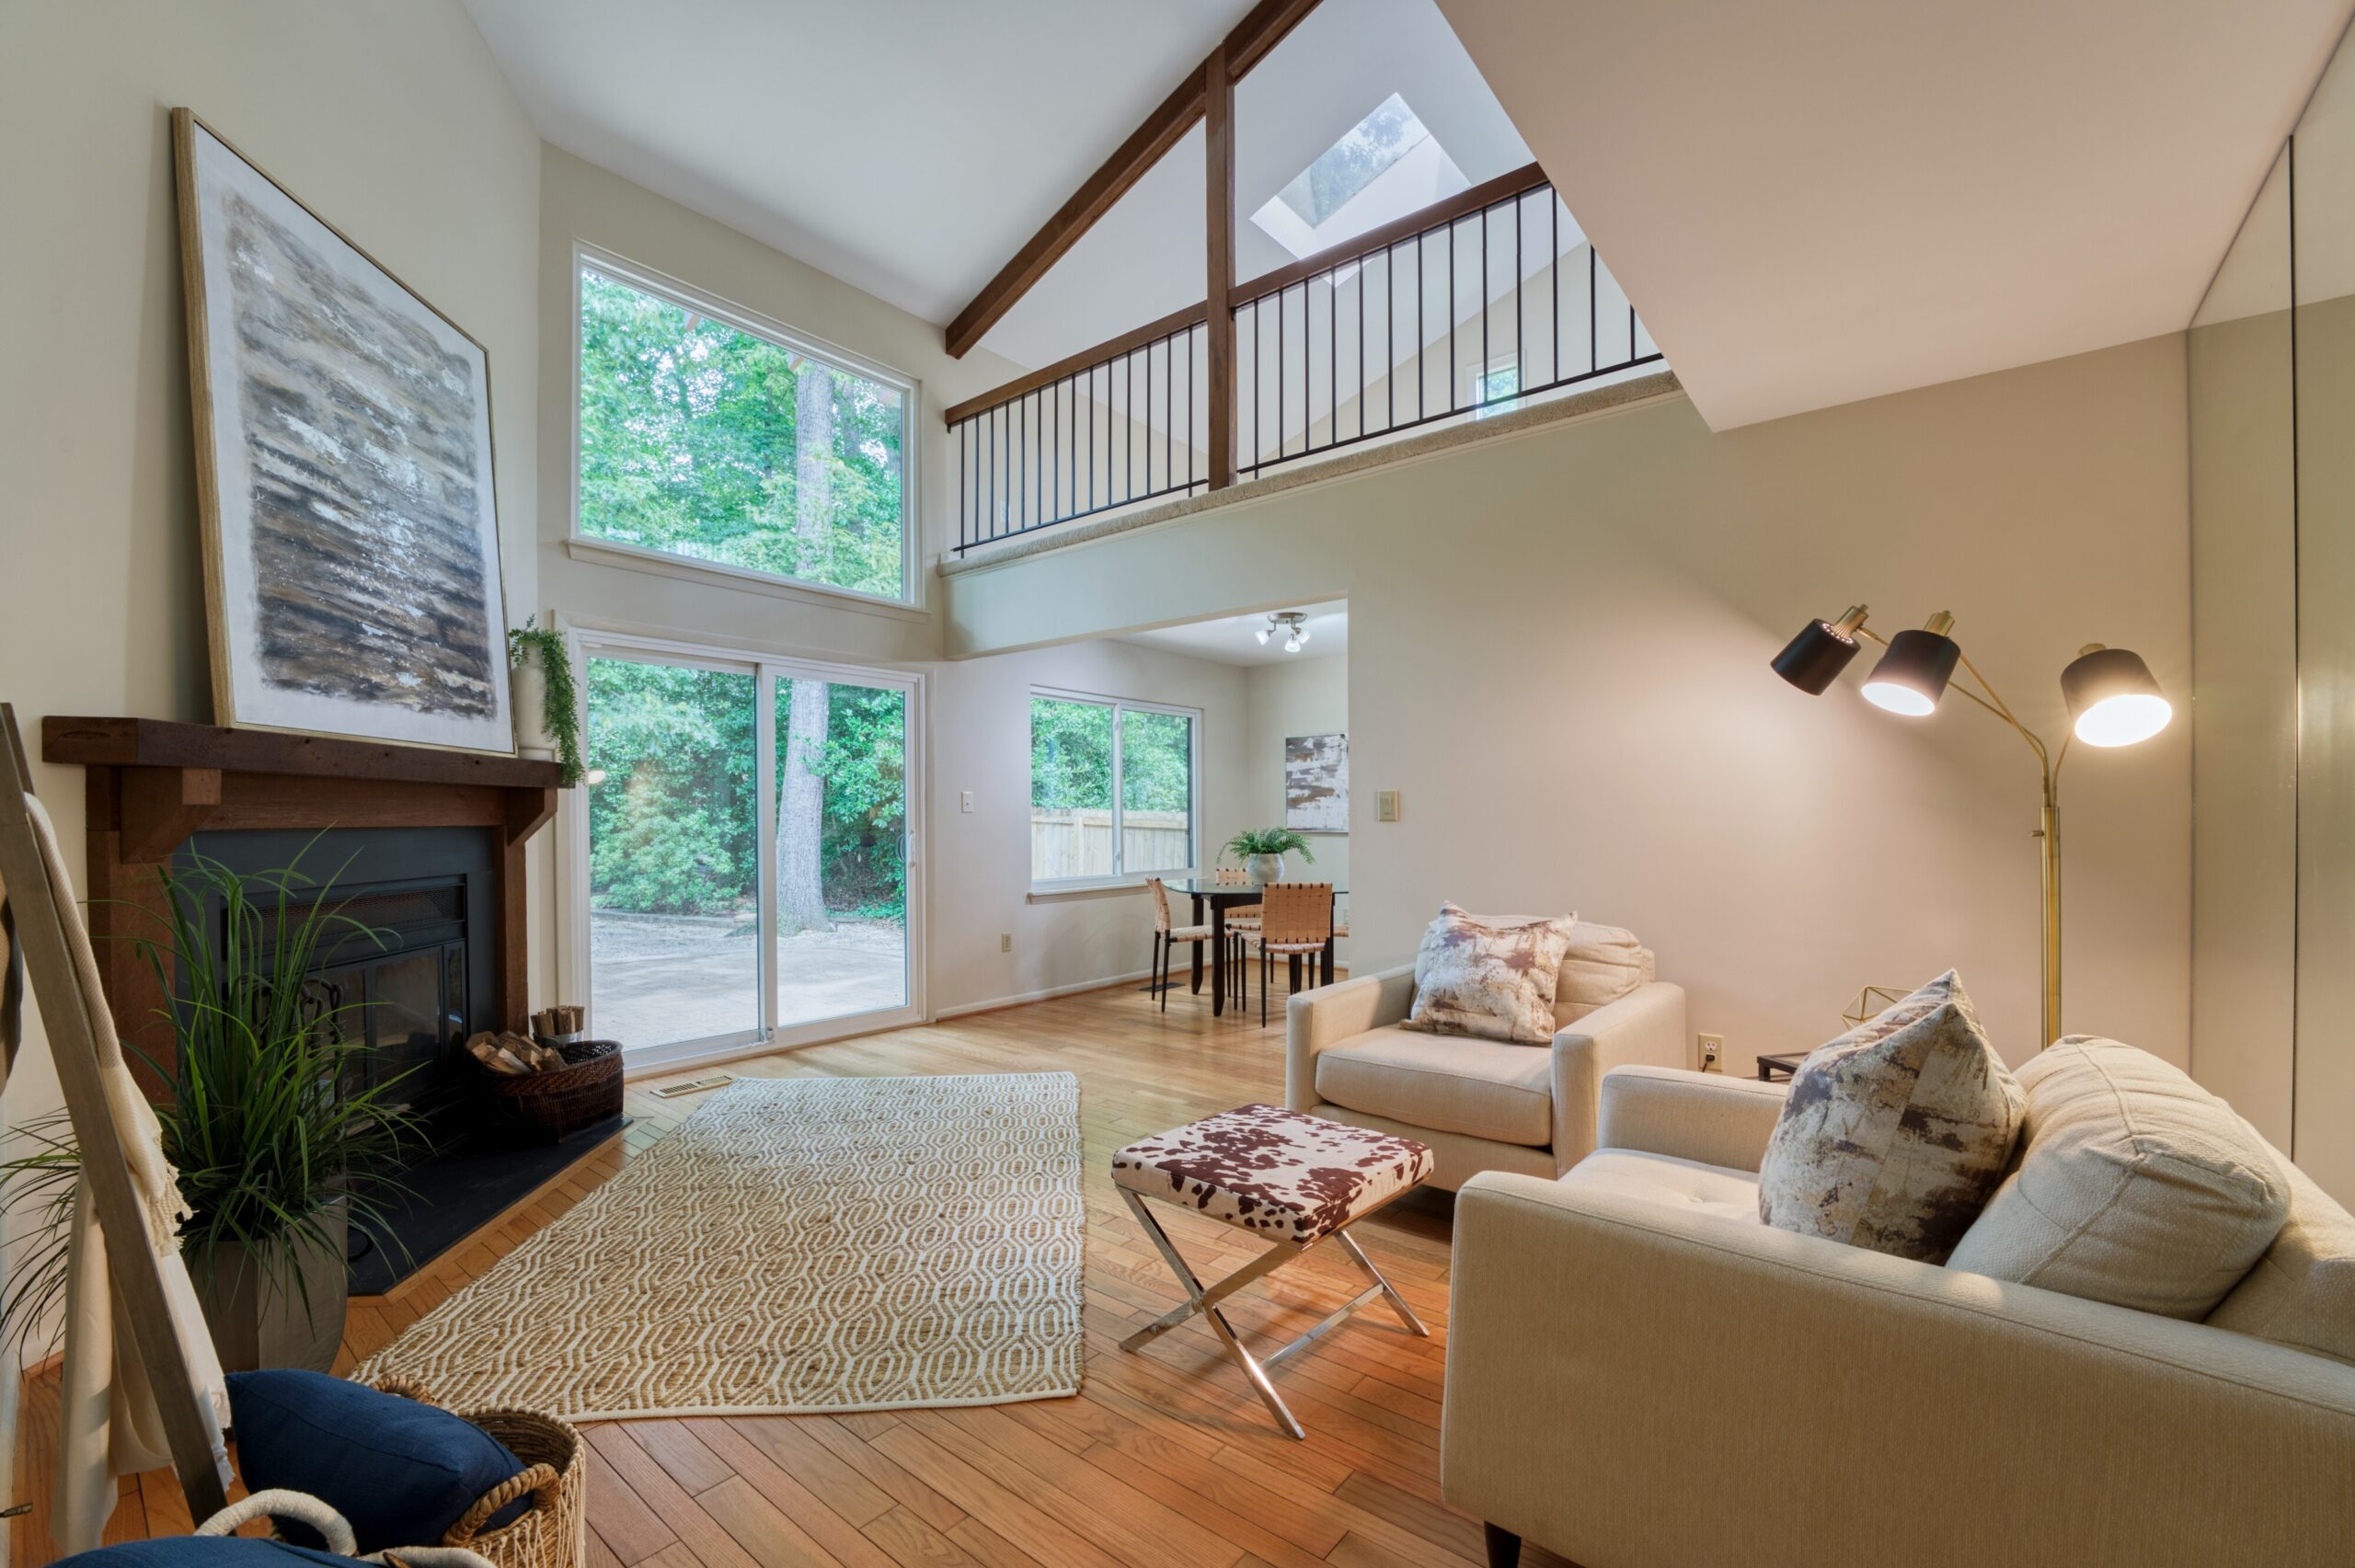 Professional interior photo of 5222 Bradfield Dr in Burke, Virginia - showing the living room with fireplace and vaulted ceiling and hardwood floors